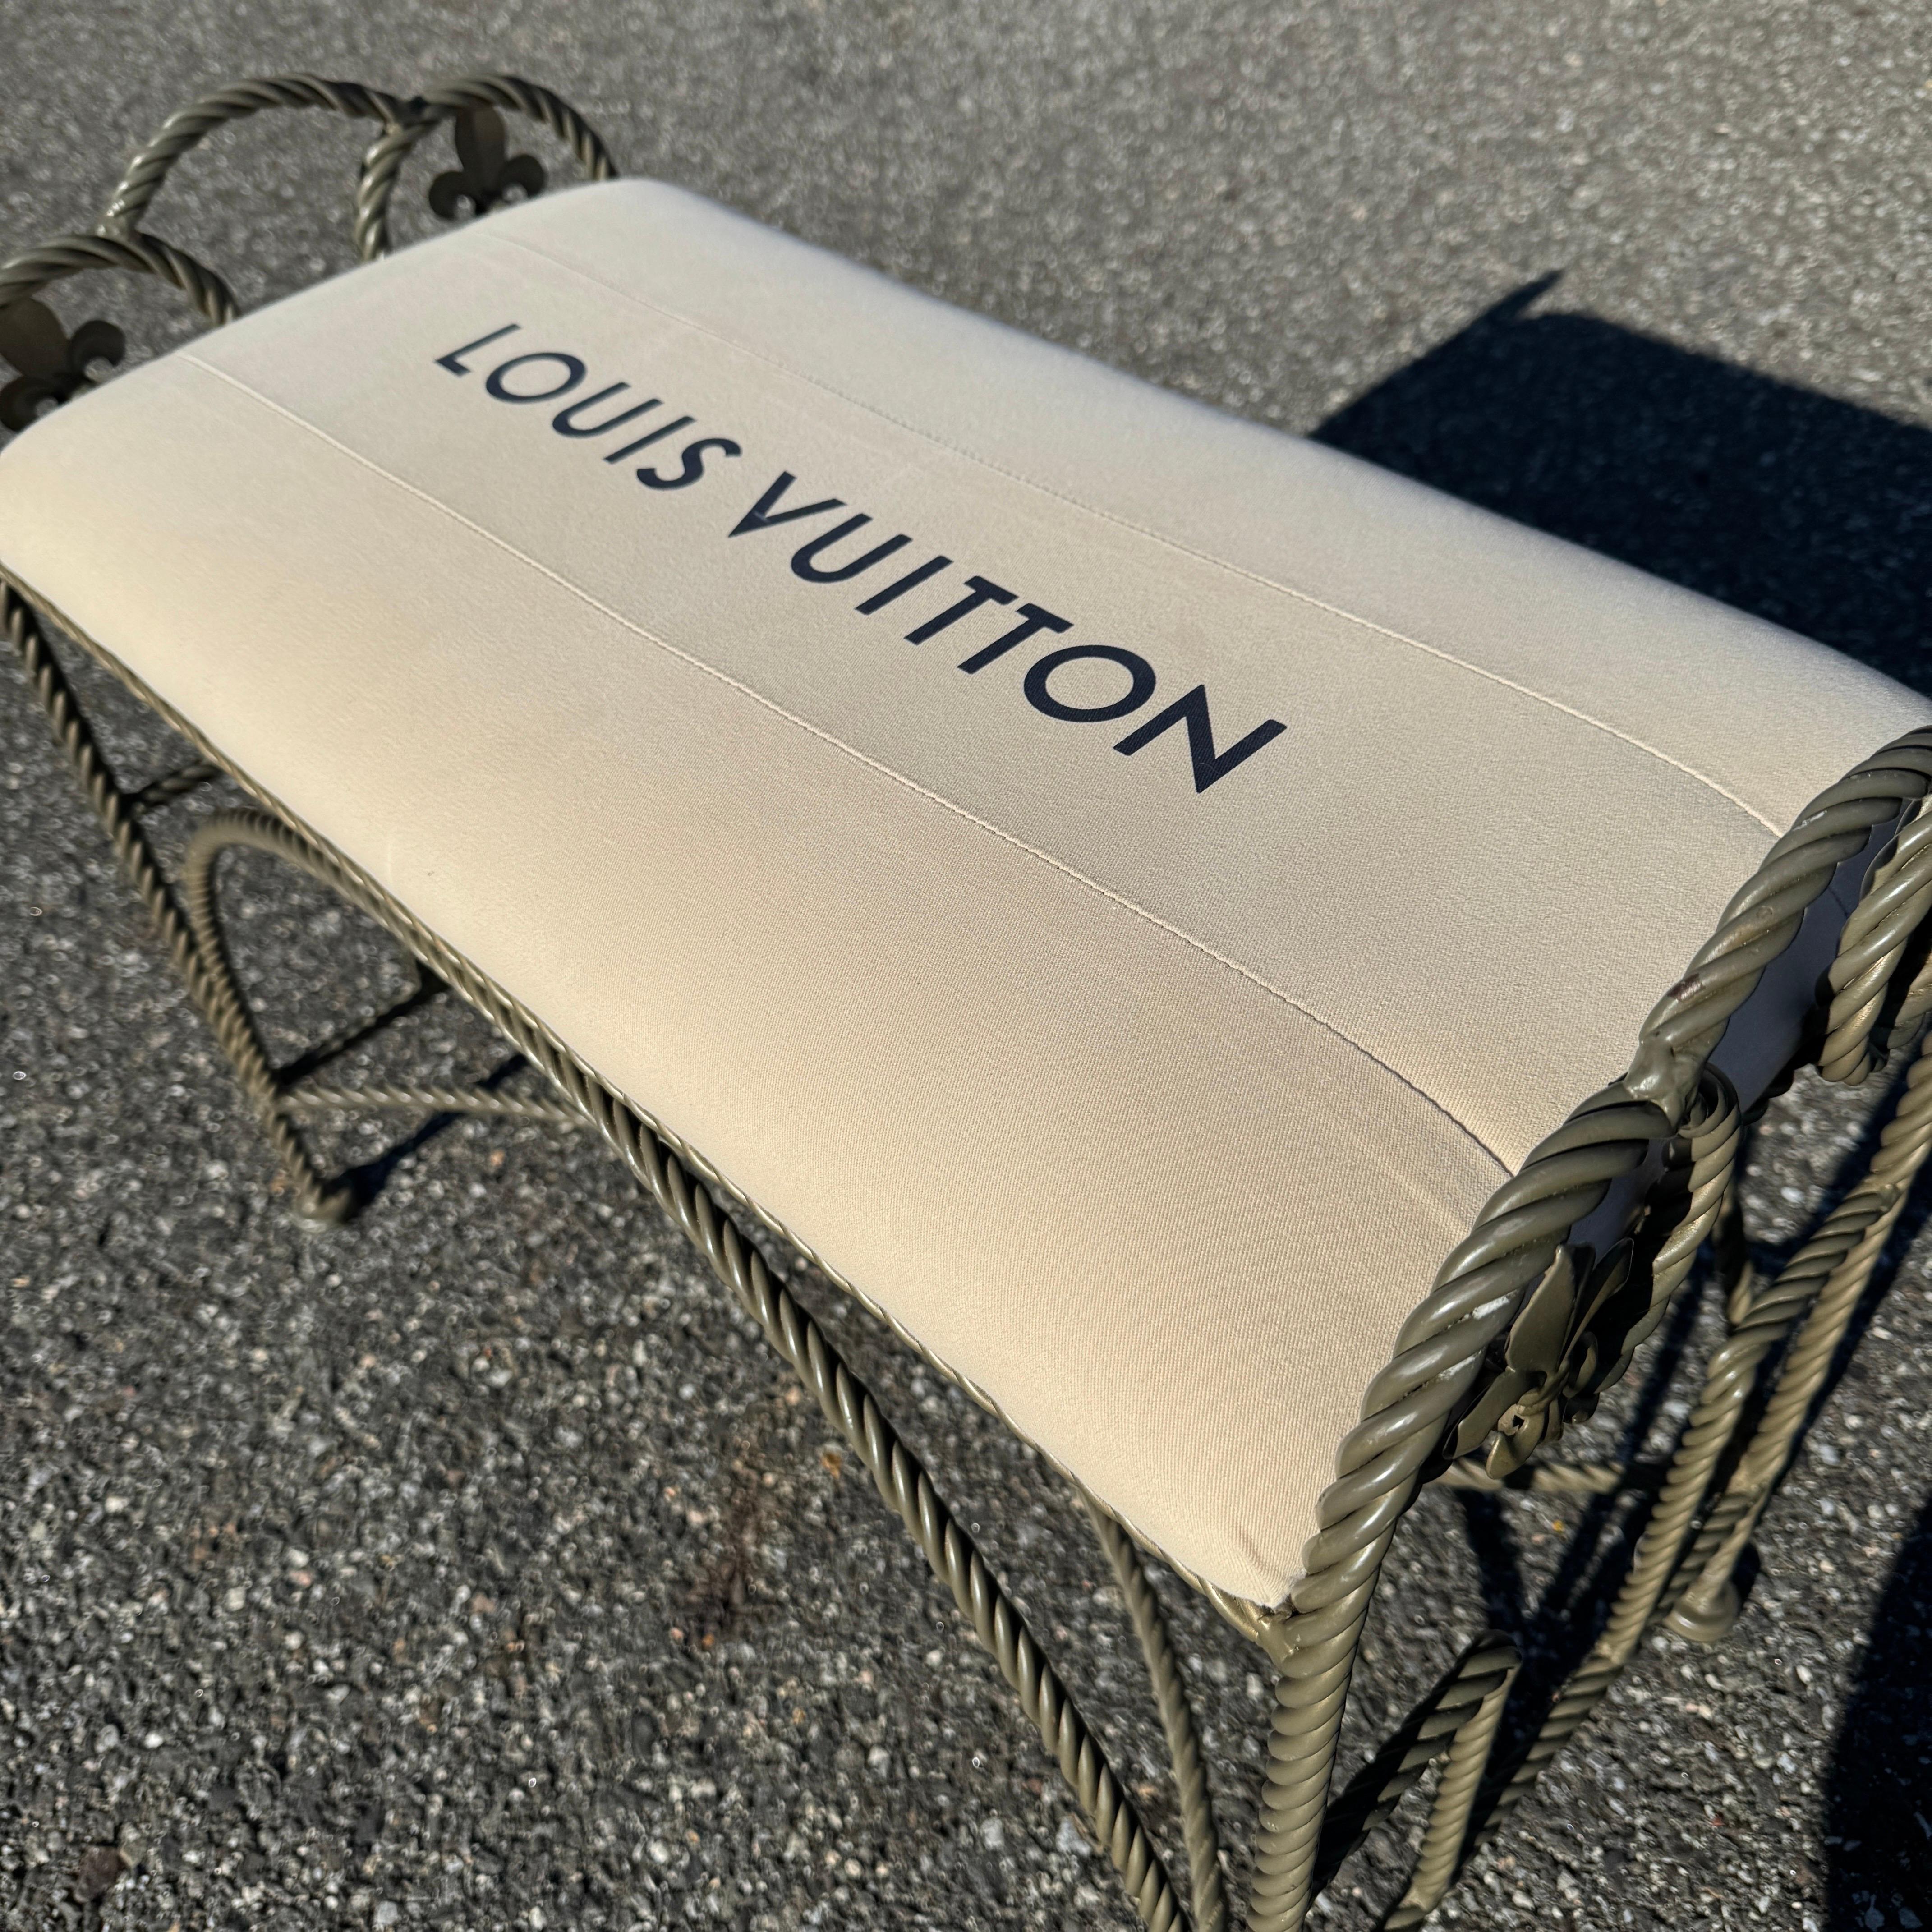 French Vintage Roped Iron Bench With Louis Vuitton Bag Fabric 7